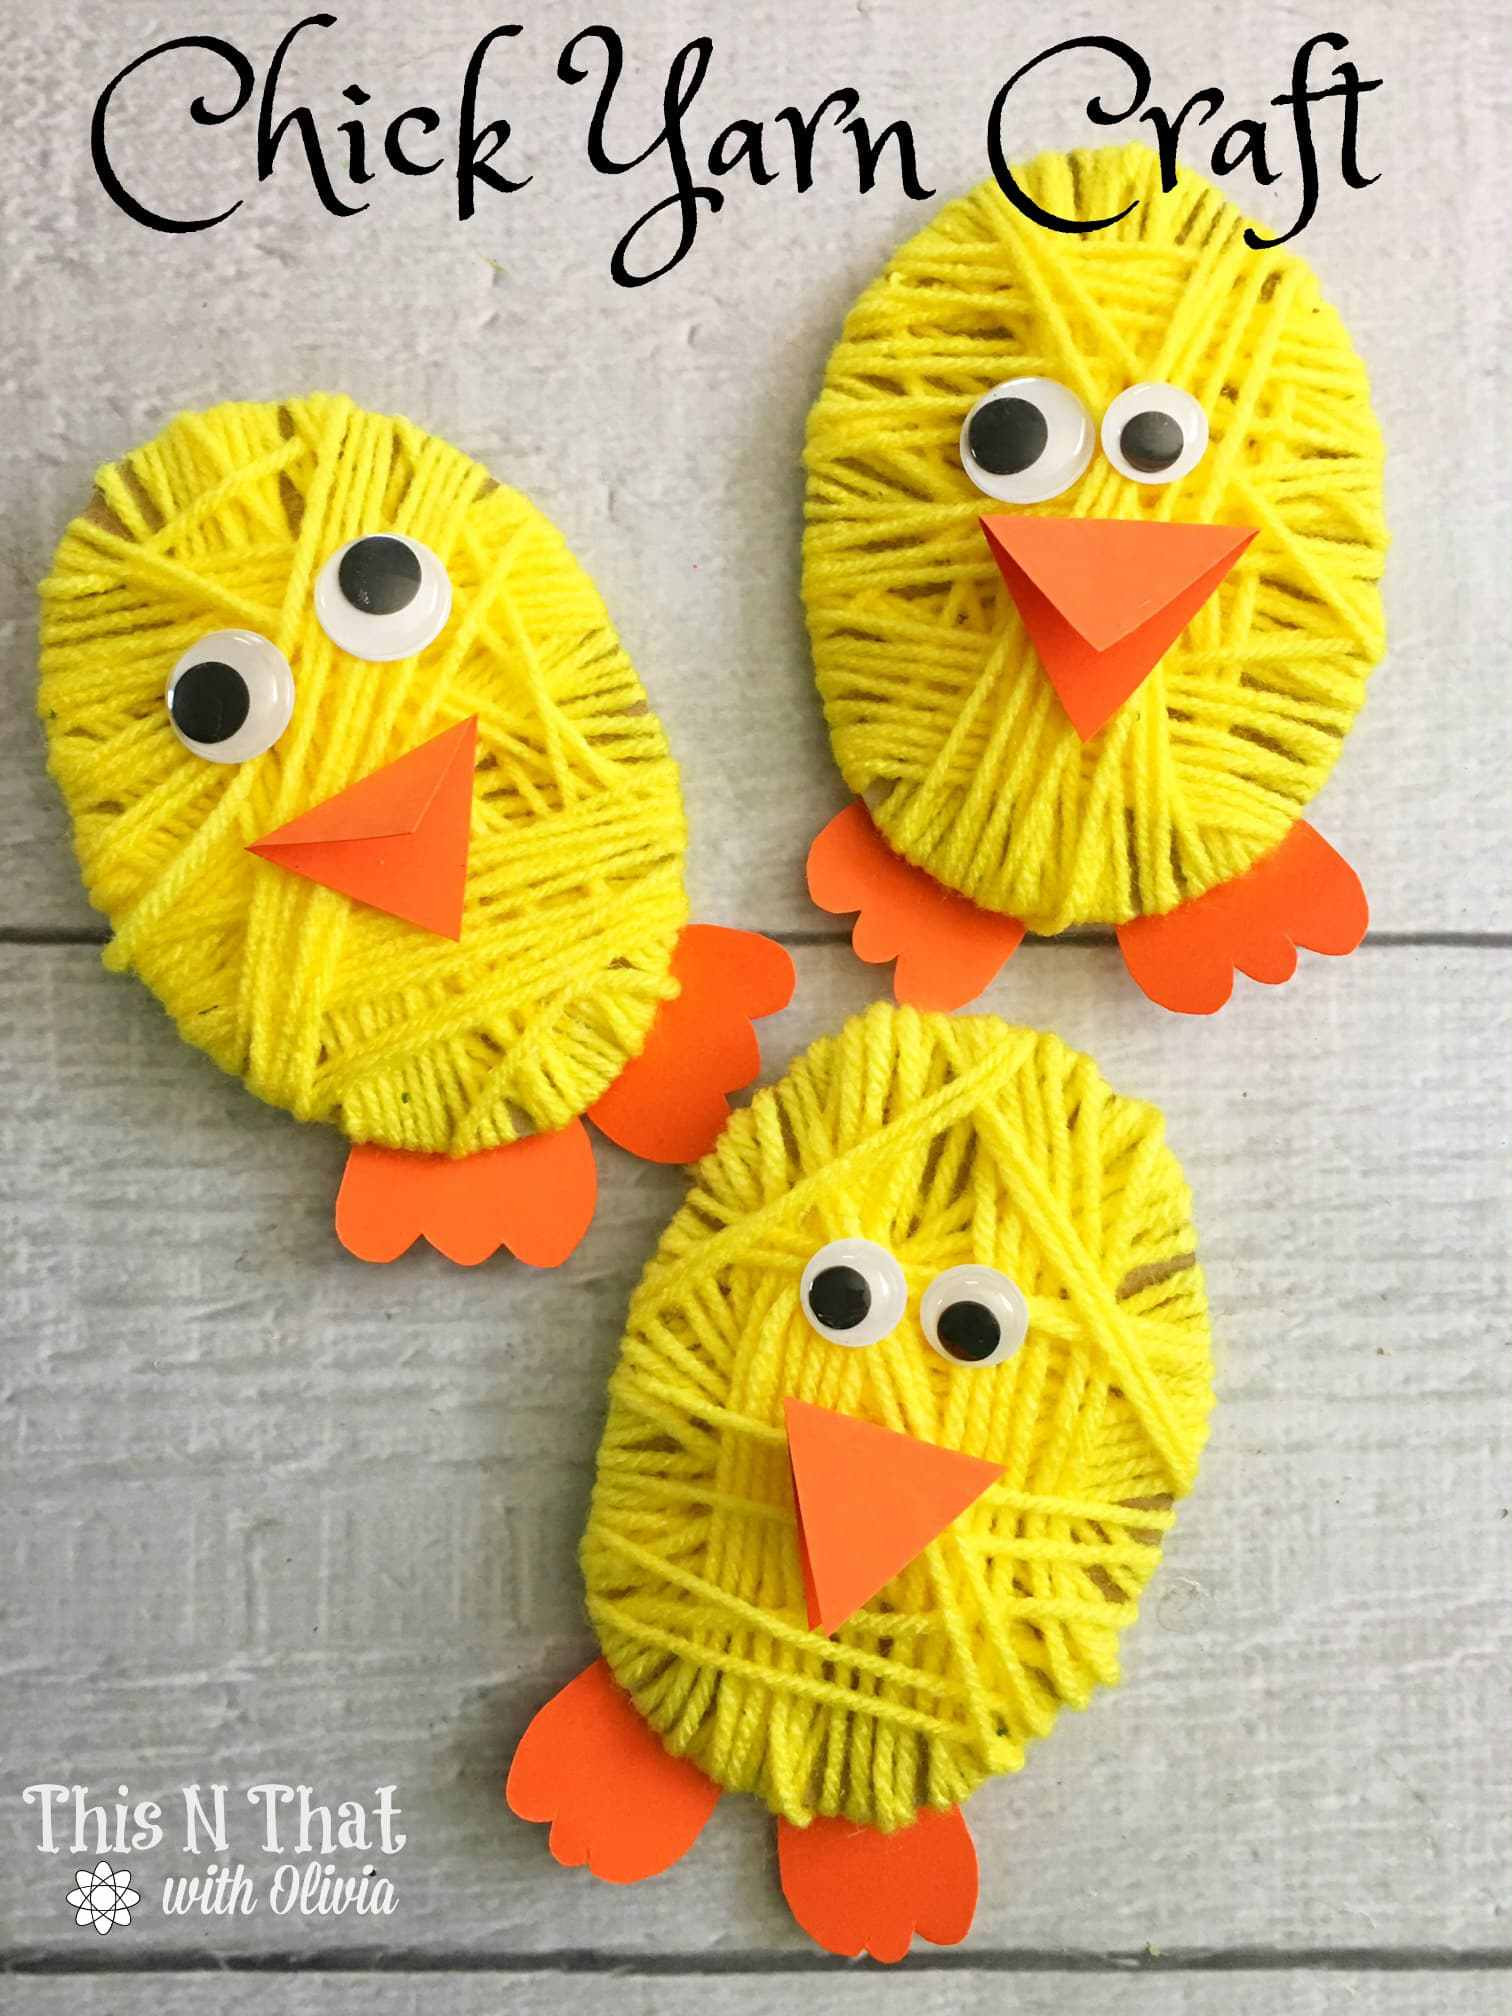 Toddler Art And Craft Ideas
 Over 33 Easter Craft Ideas for Kids to Make Simple Cute